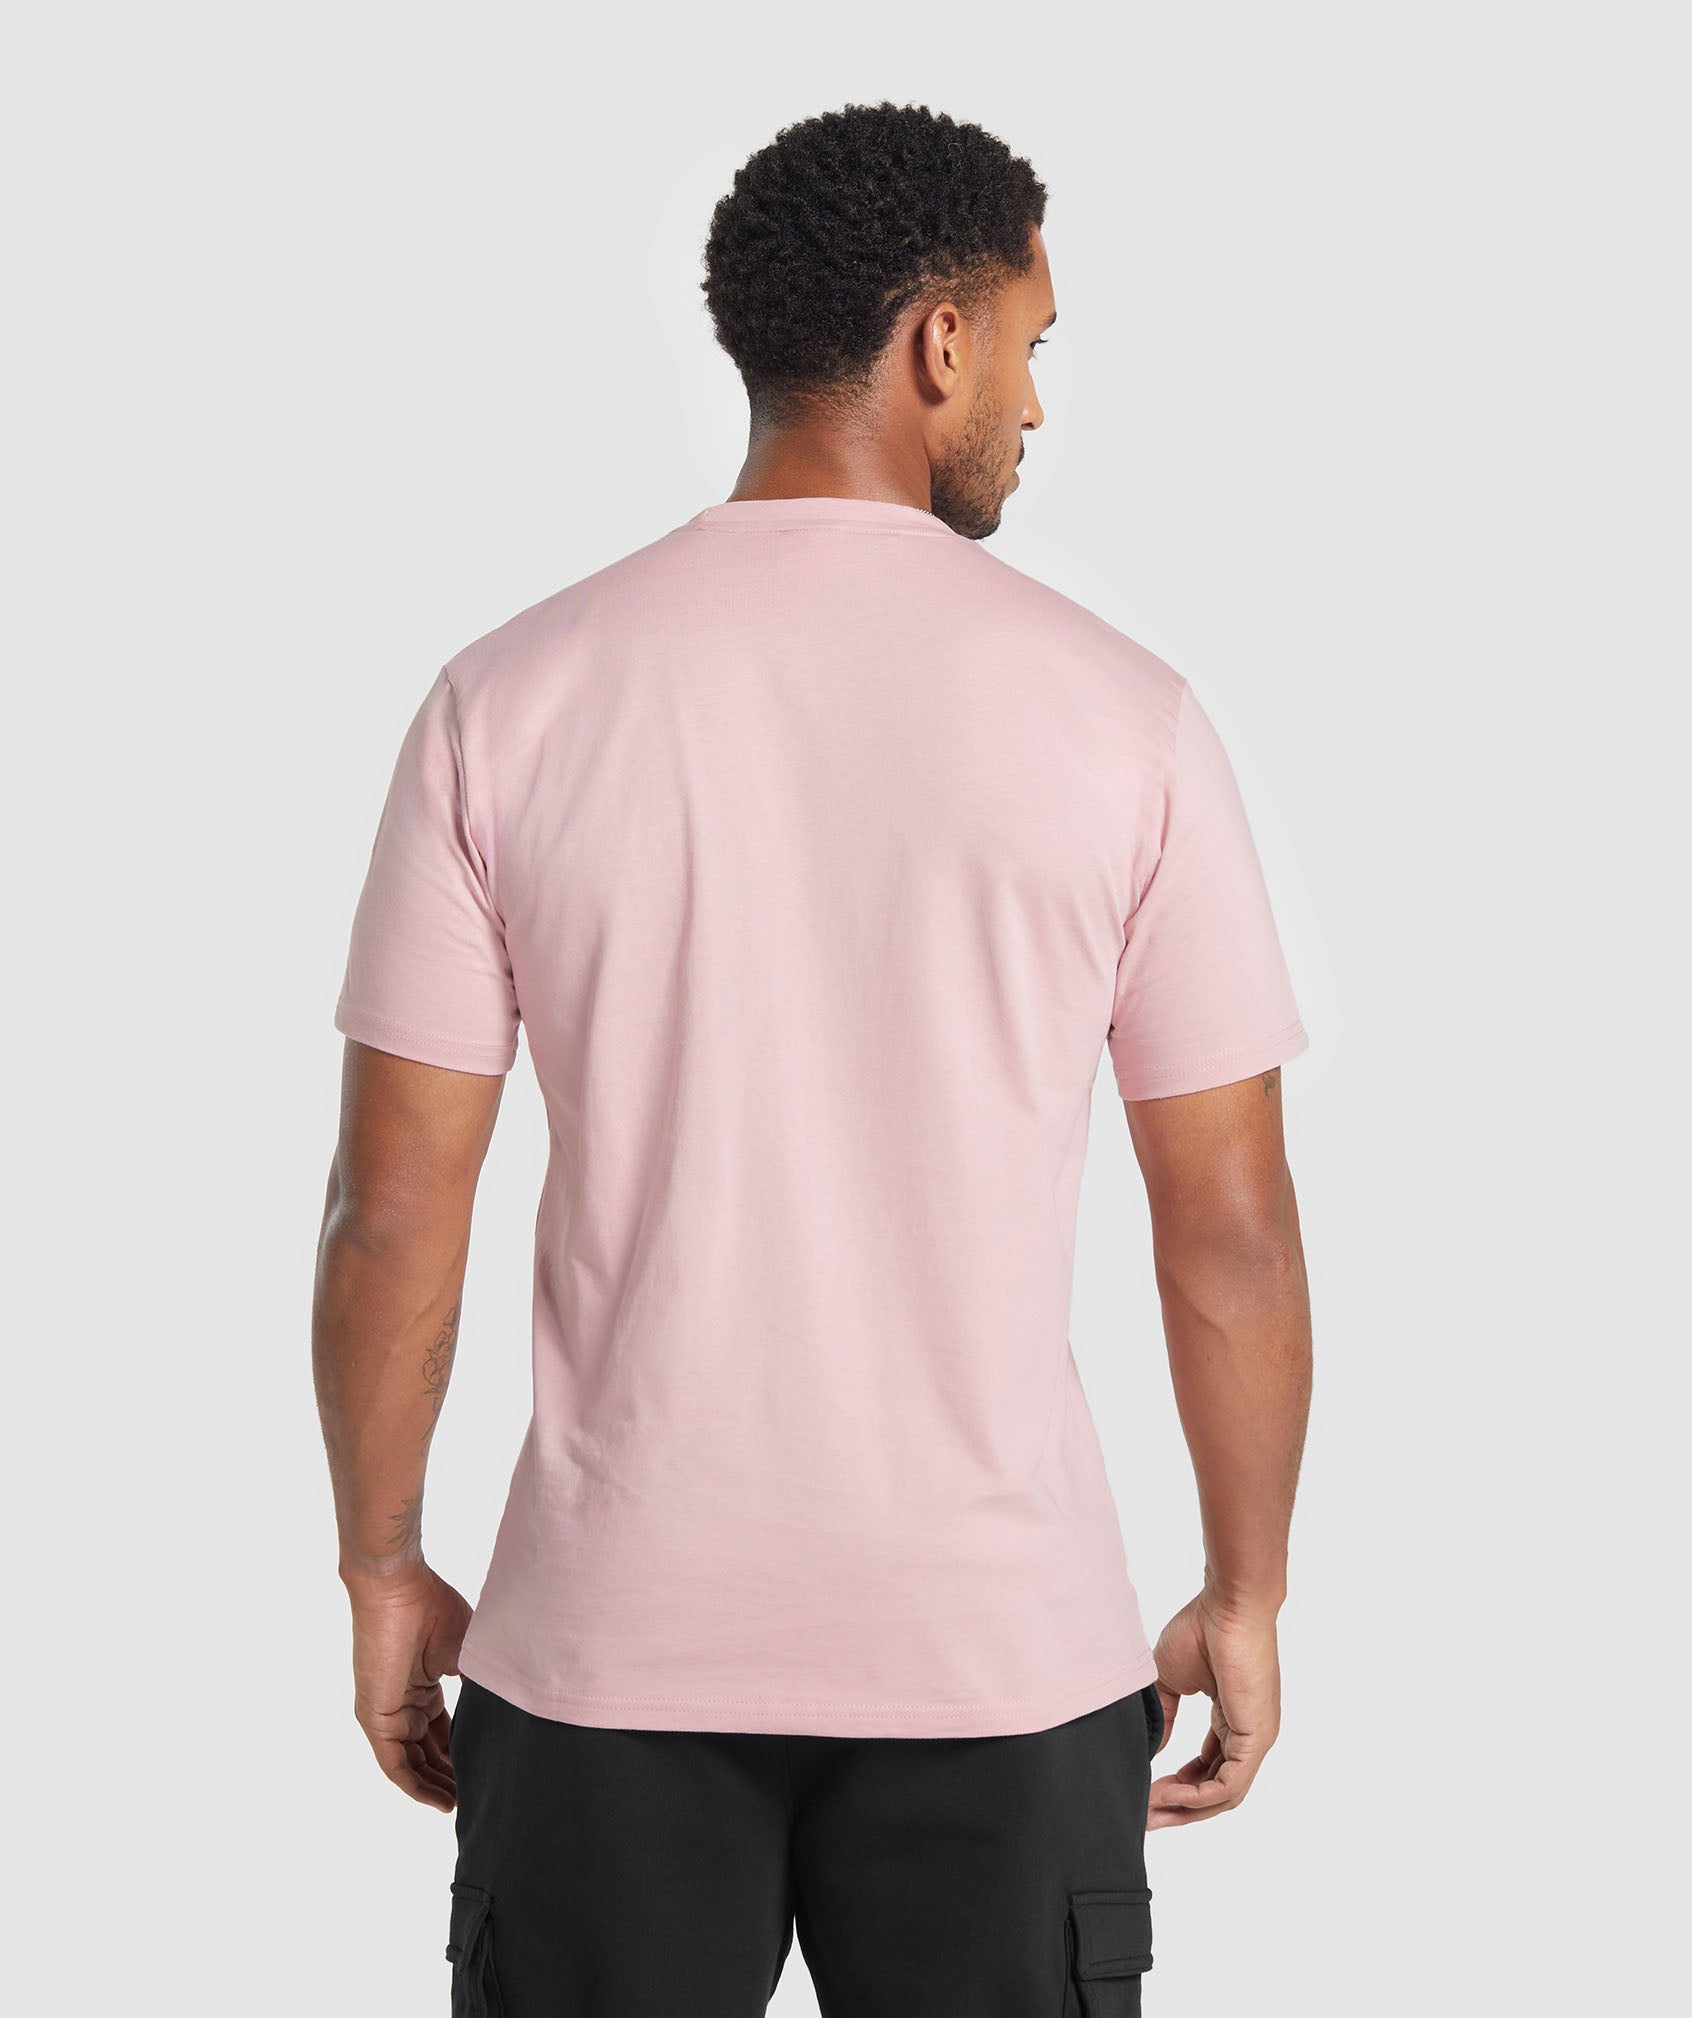 Crest T-Shirt in Light Pink - view 2